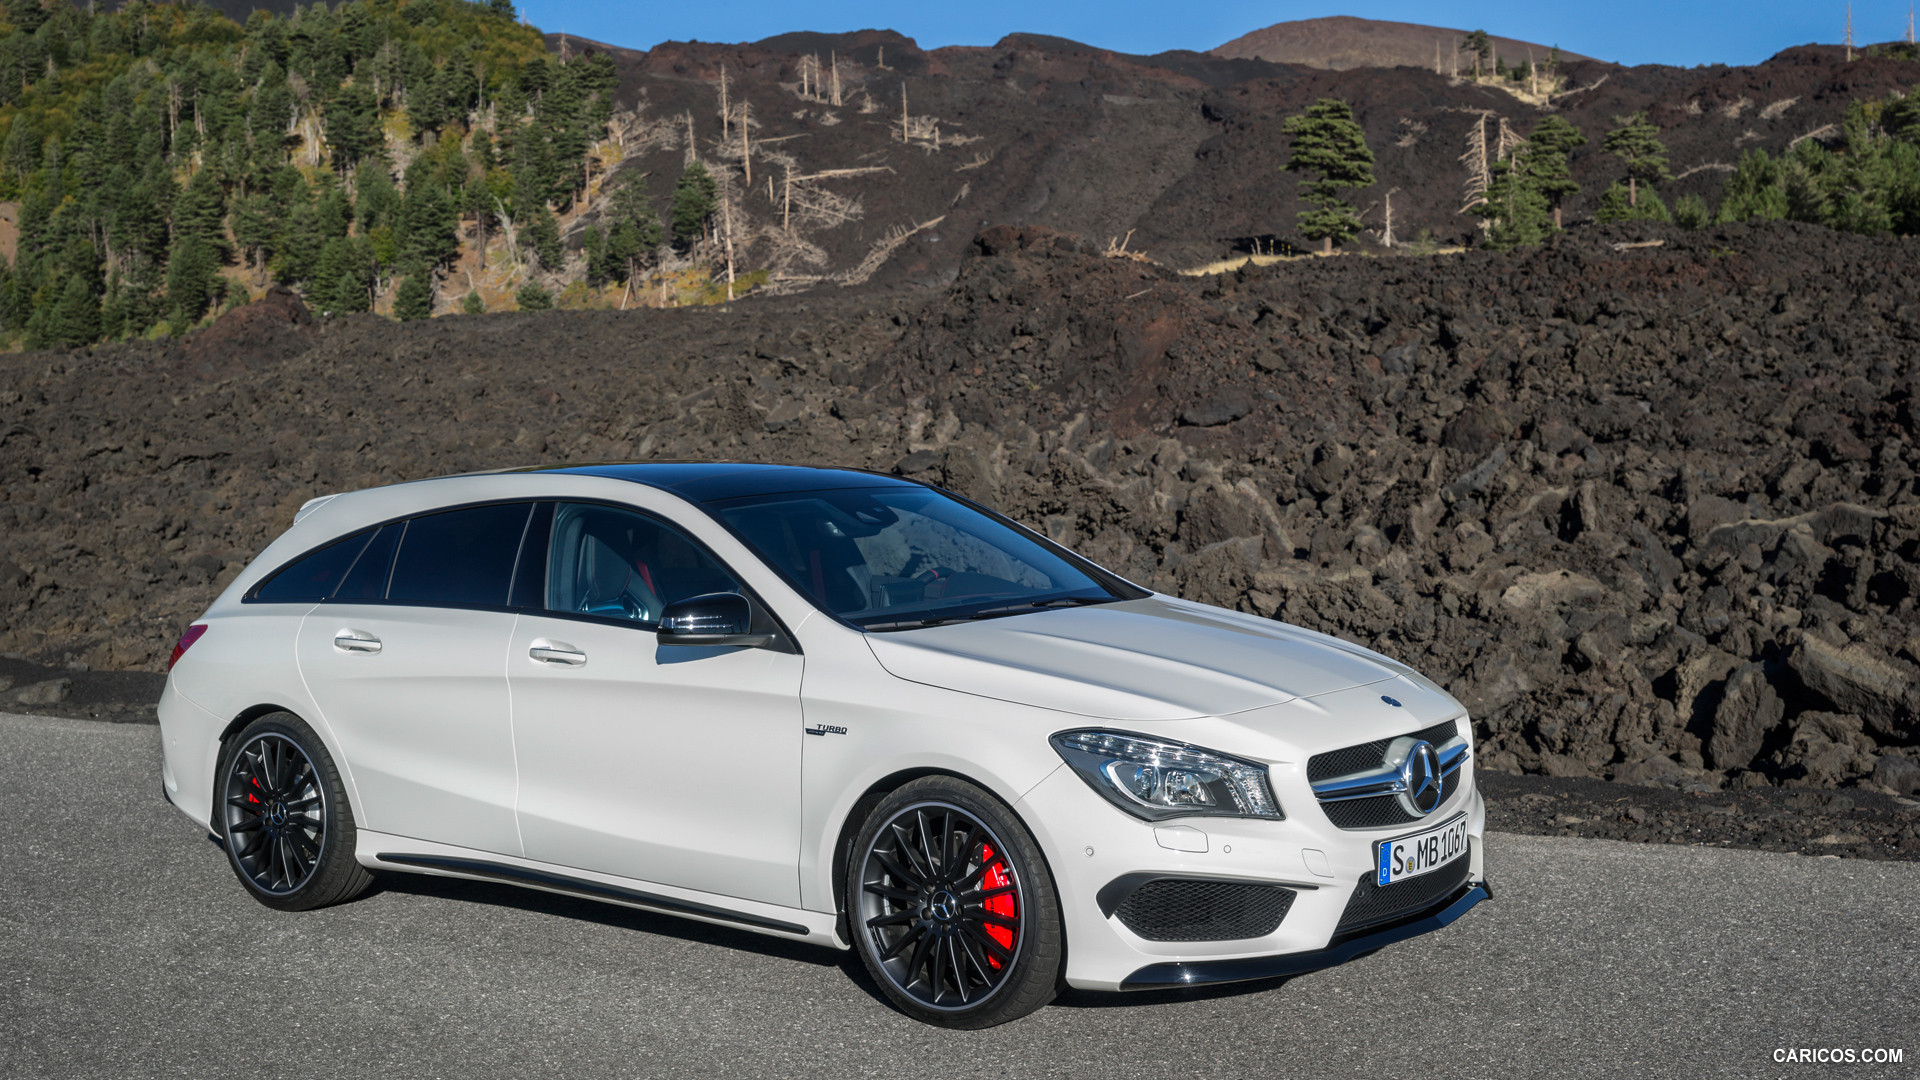 2015 Mercedes-Benz CLA 45 AMG Shooting Brake (Calcite White) - Front, #37 of 70